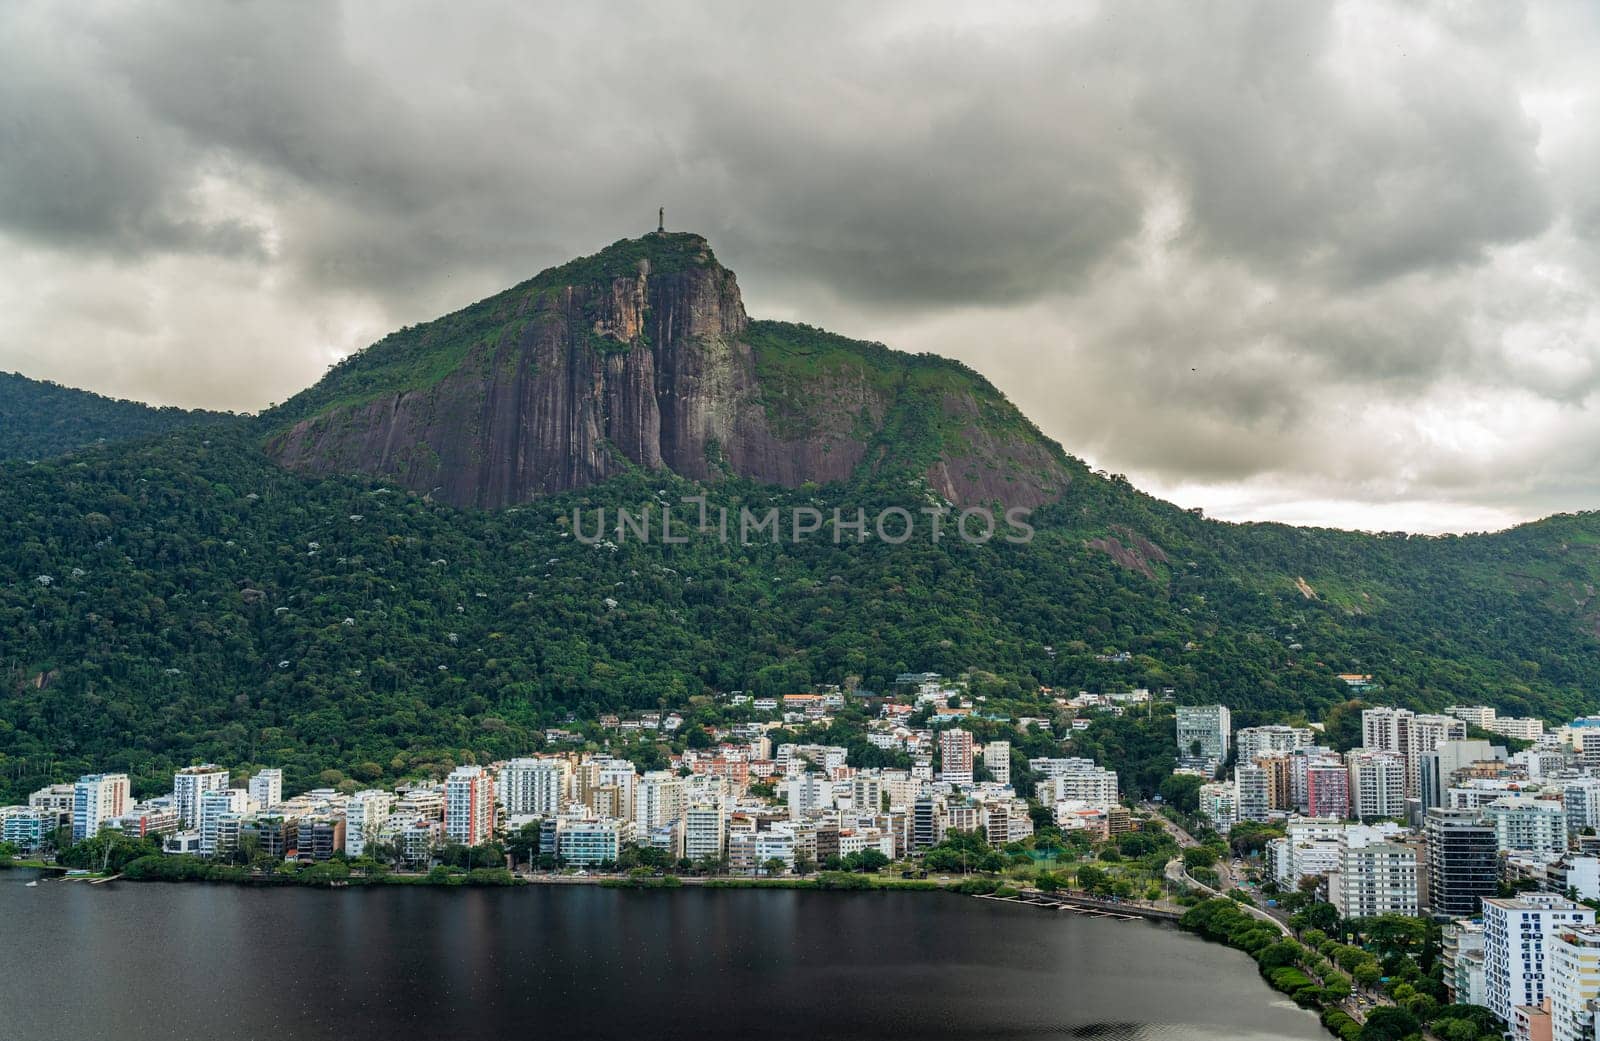 Dramatic Clouds Hovering Above Christ the Redeemer in Rio by FerradalFCG